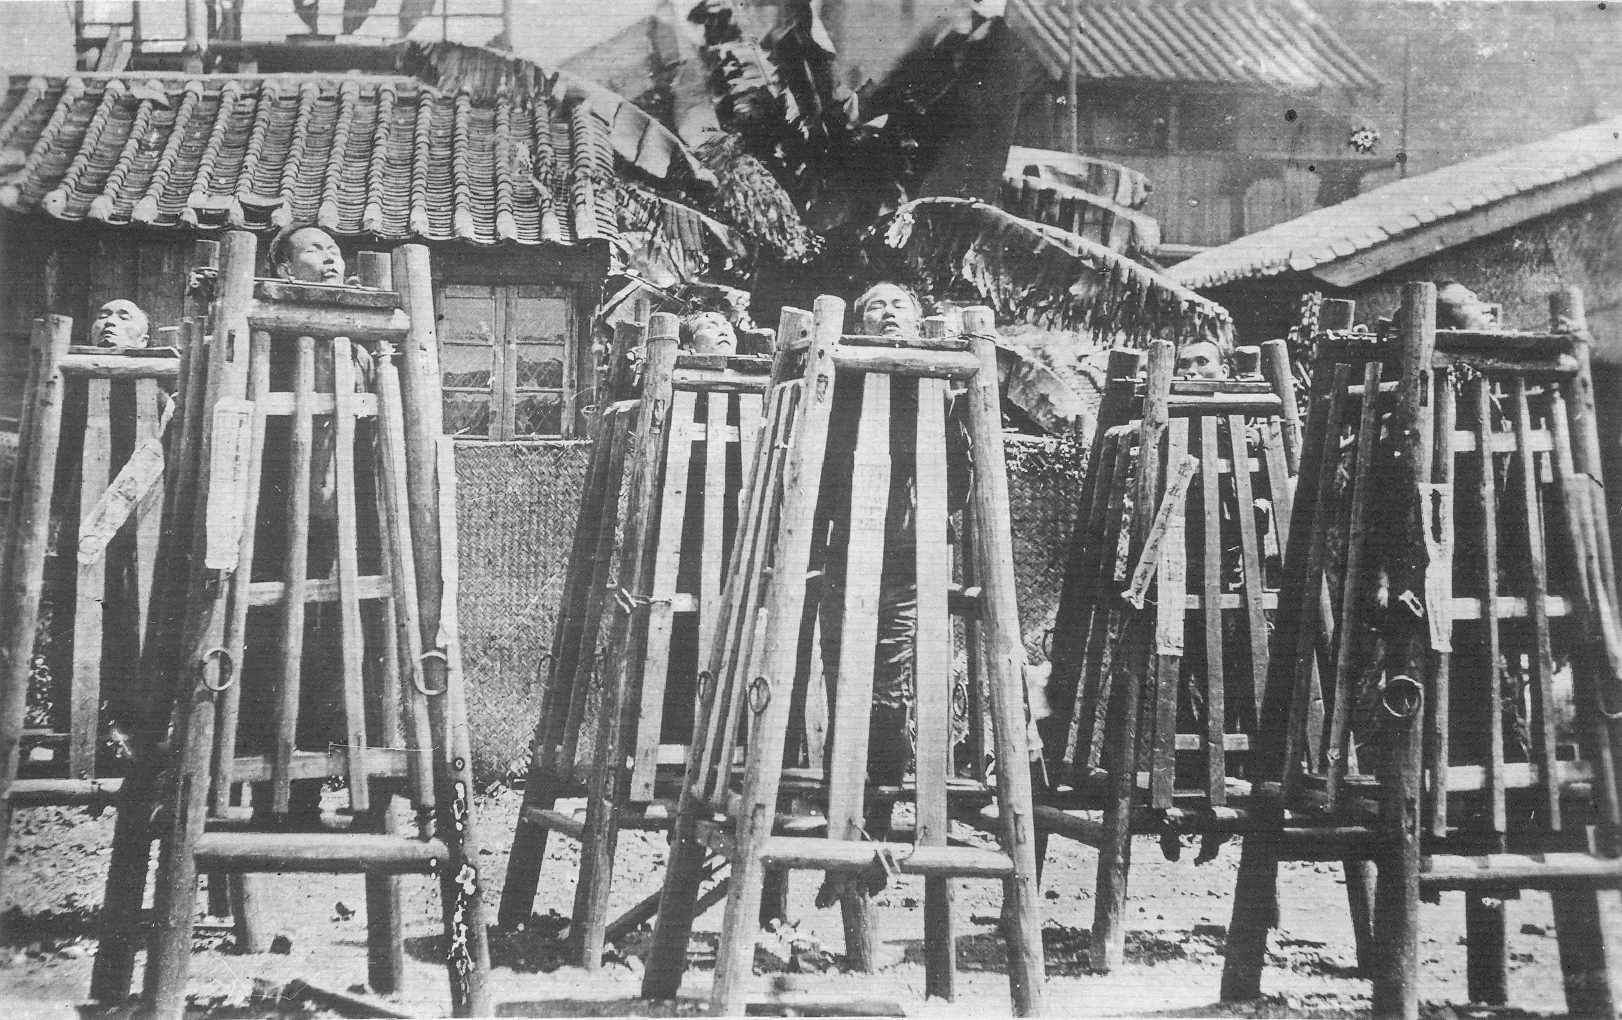 The execution of captured men after the Boxer Rebellion failed in China in 1902.